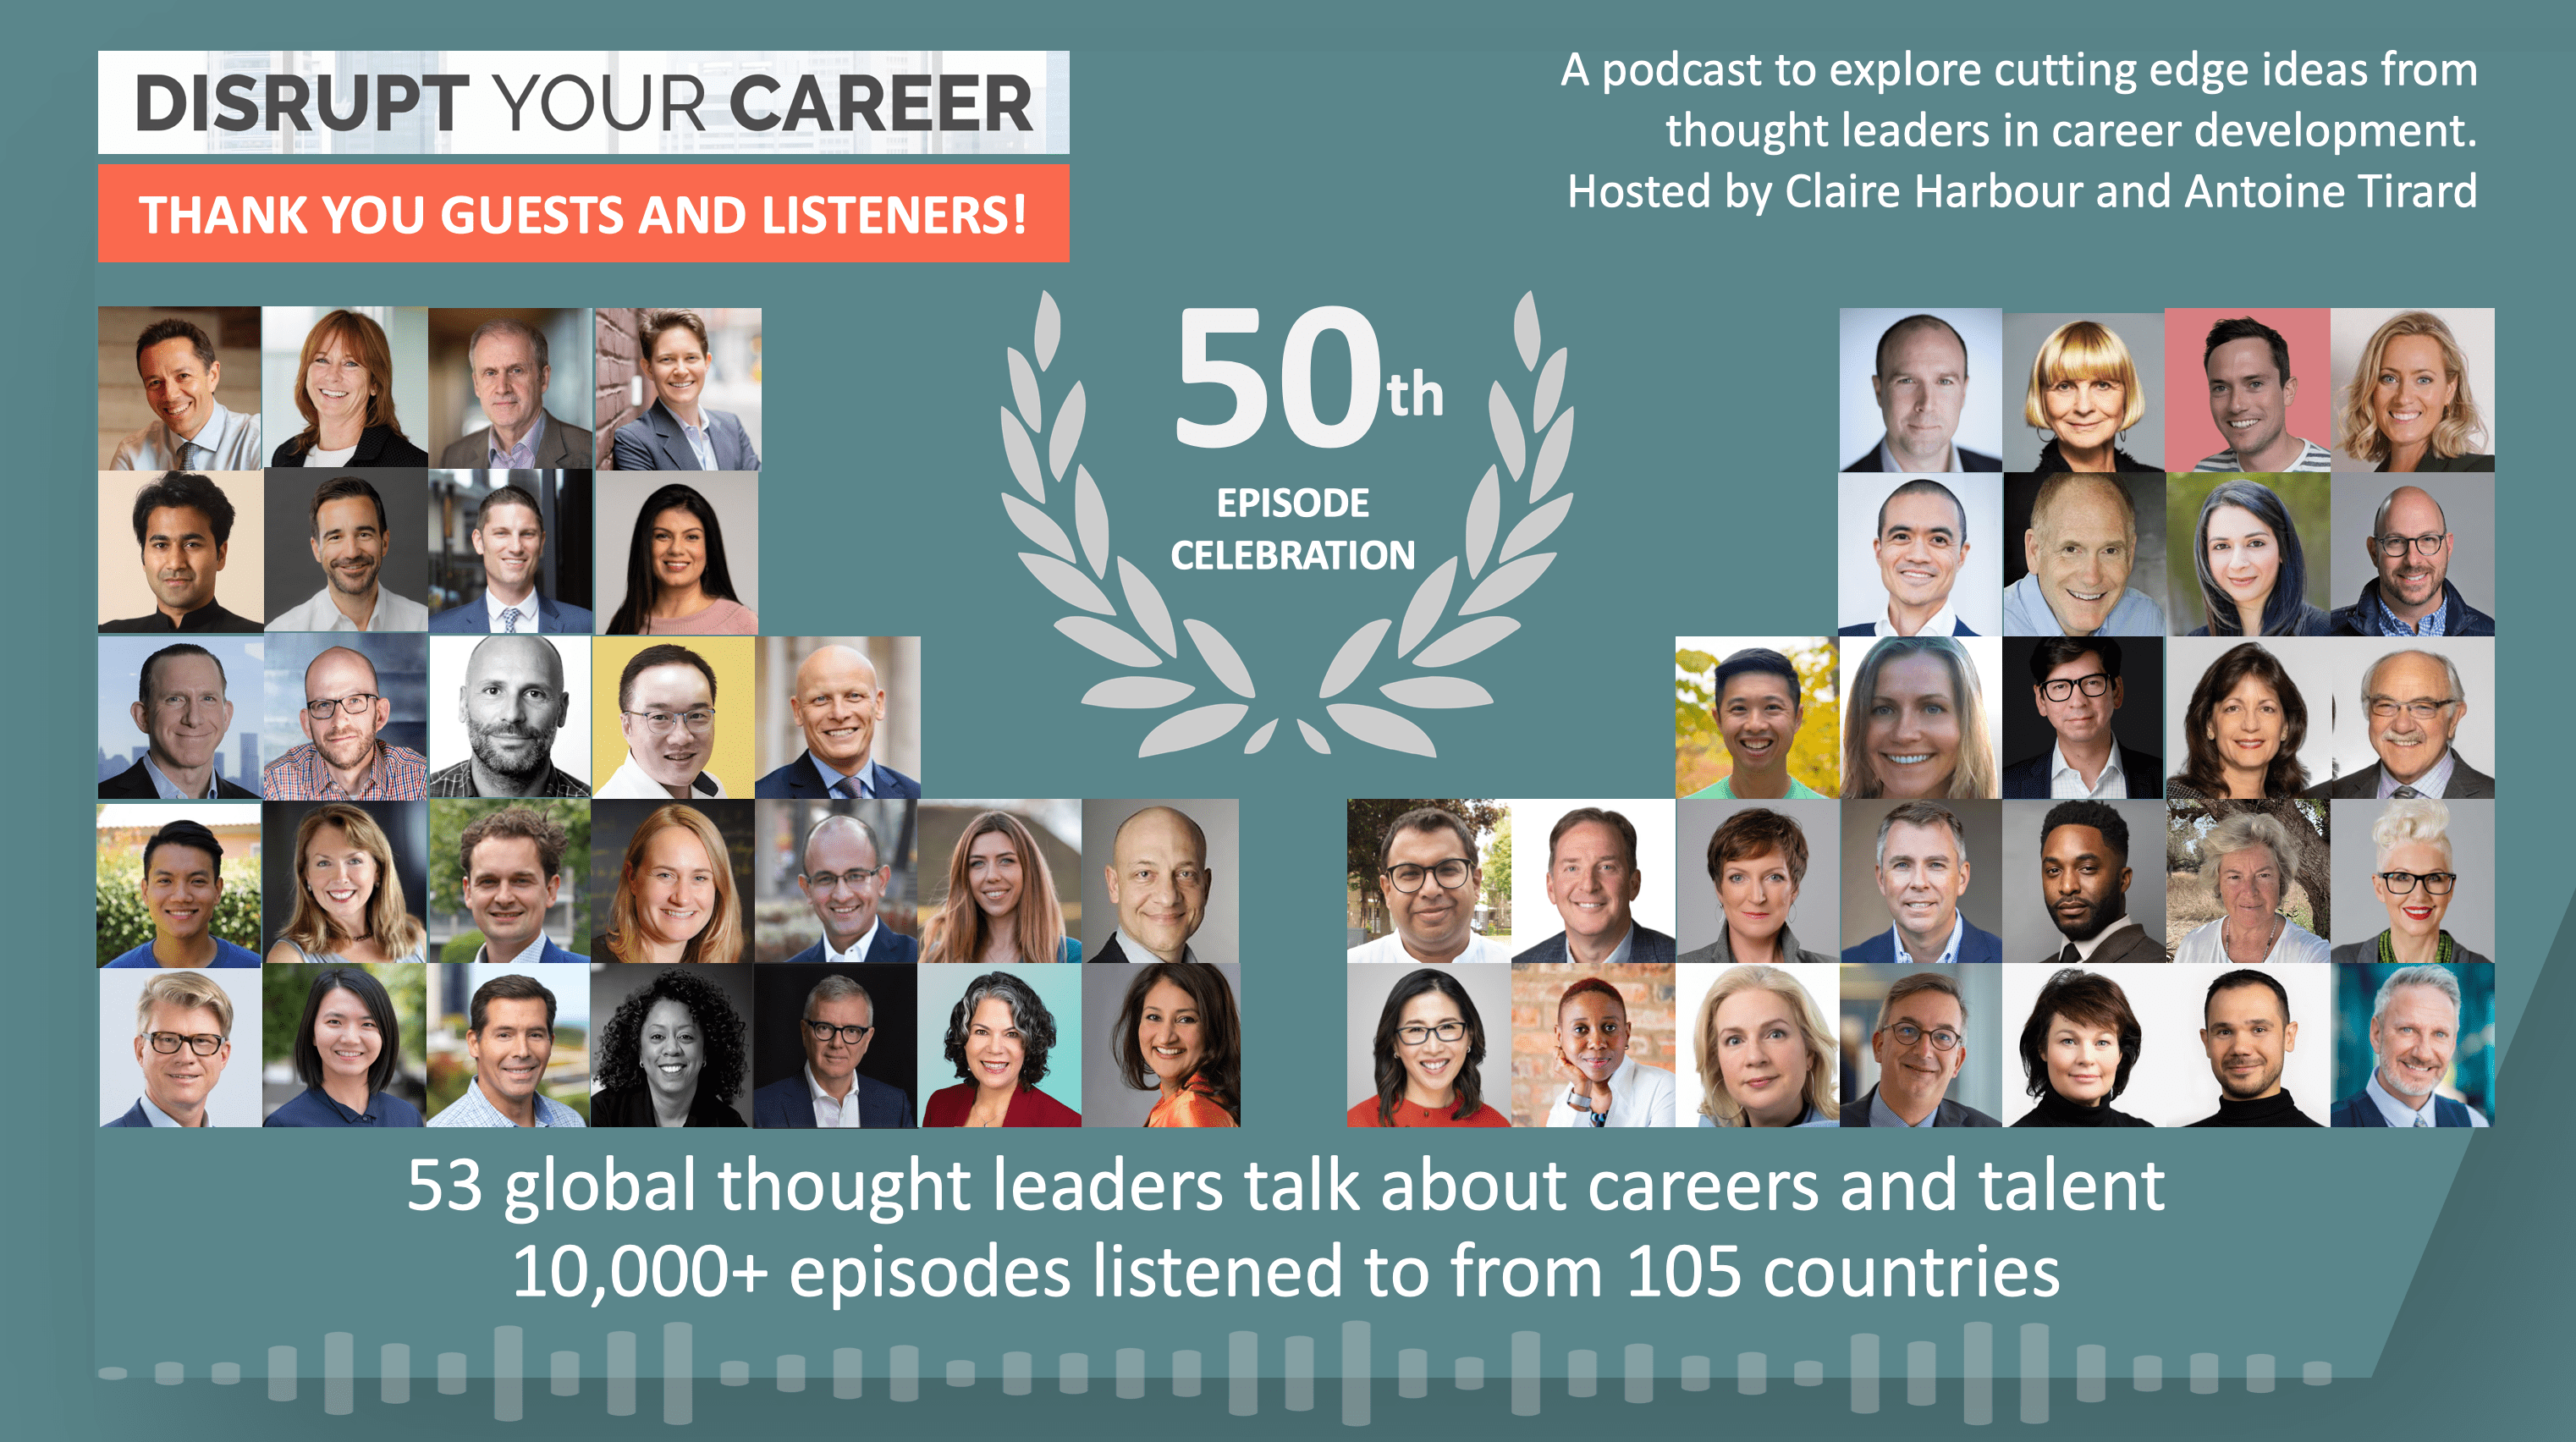 Celebrating our 50th Disrupt Your Career Podcast Episode and honoring our top thought leaders